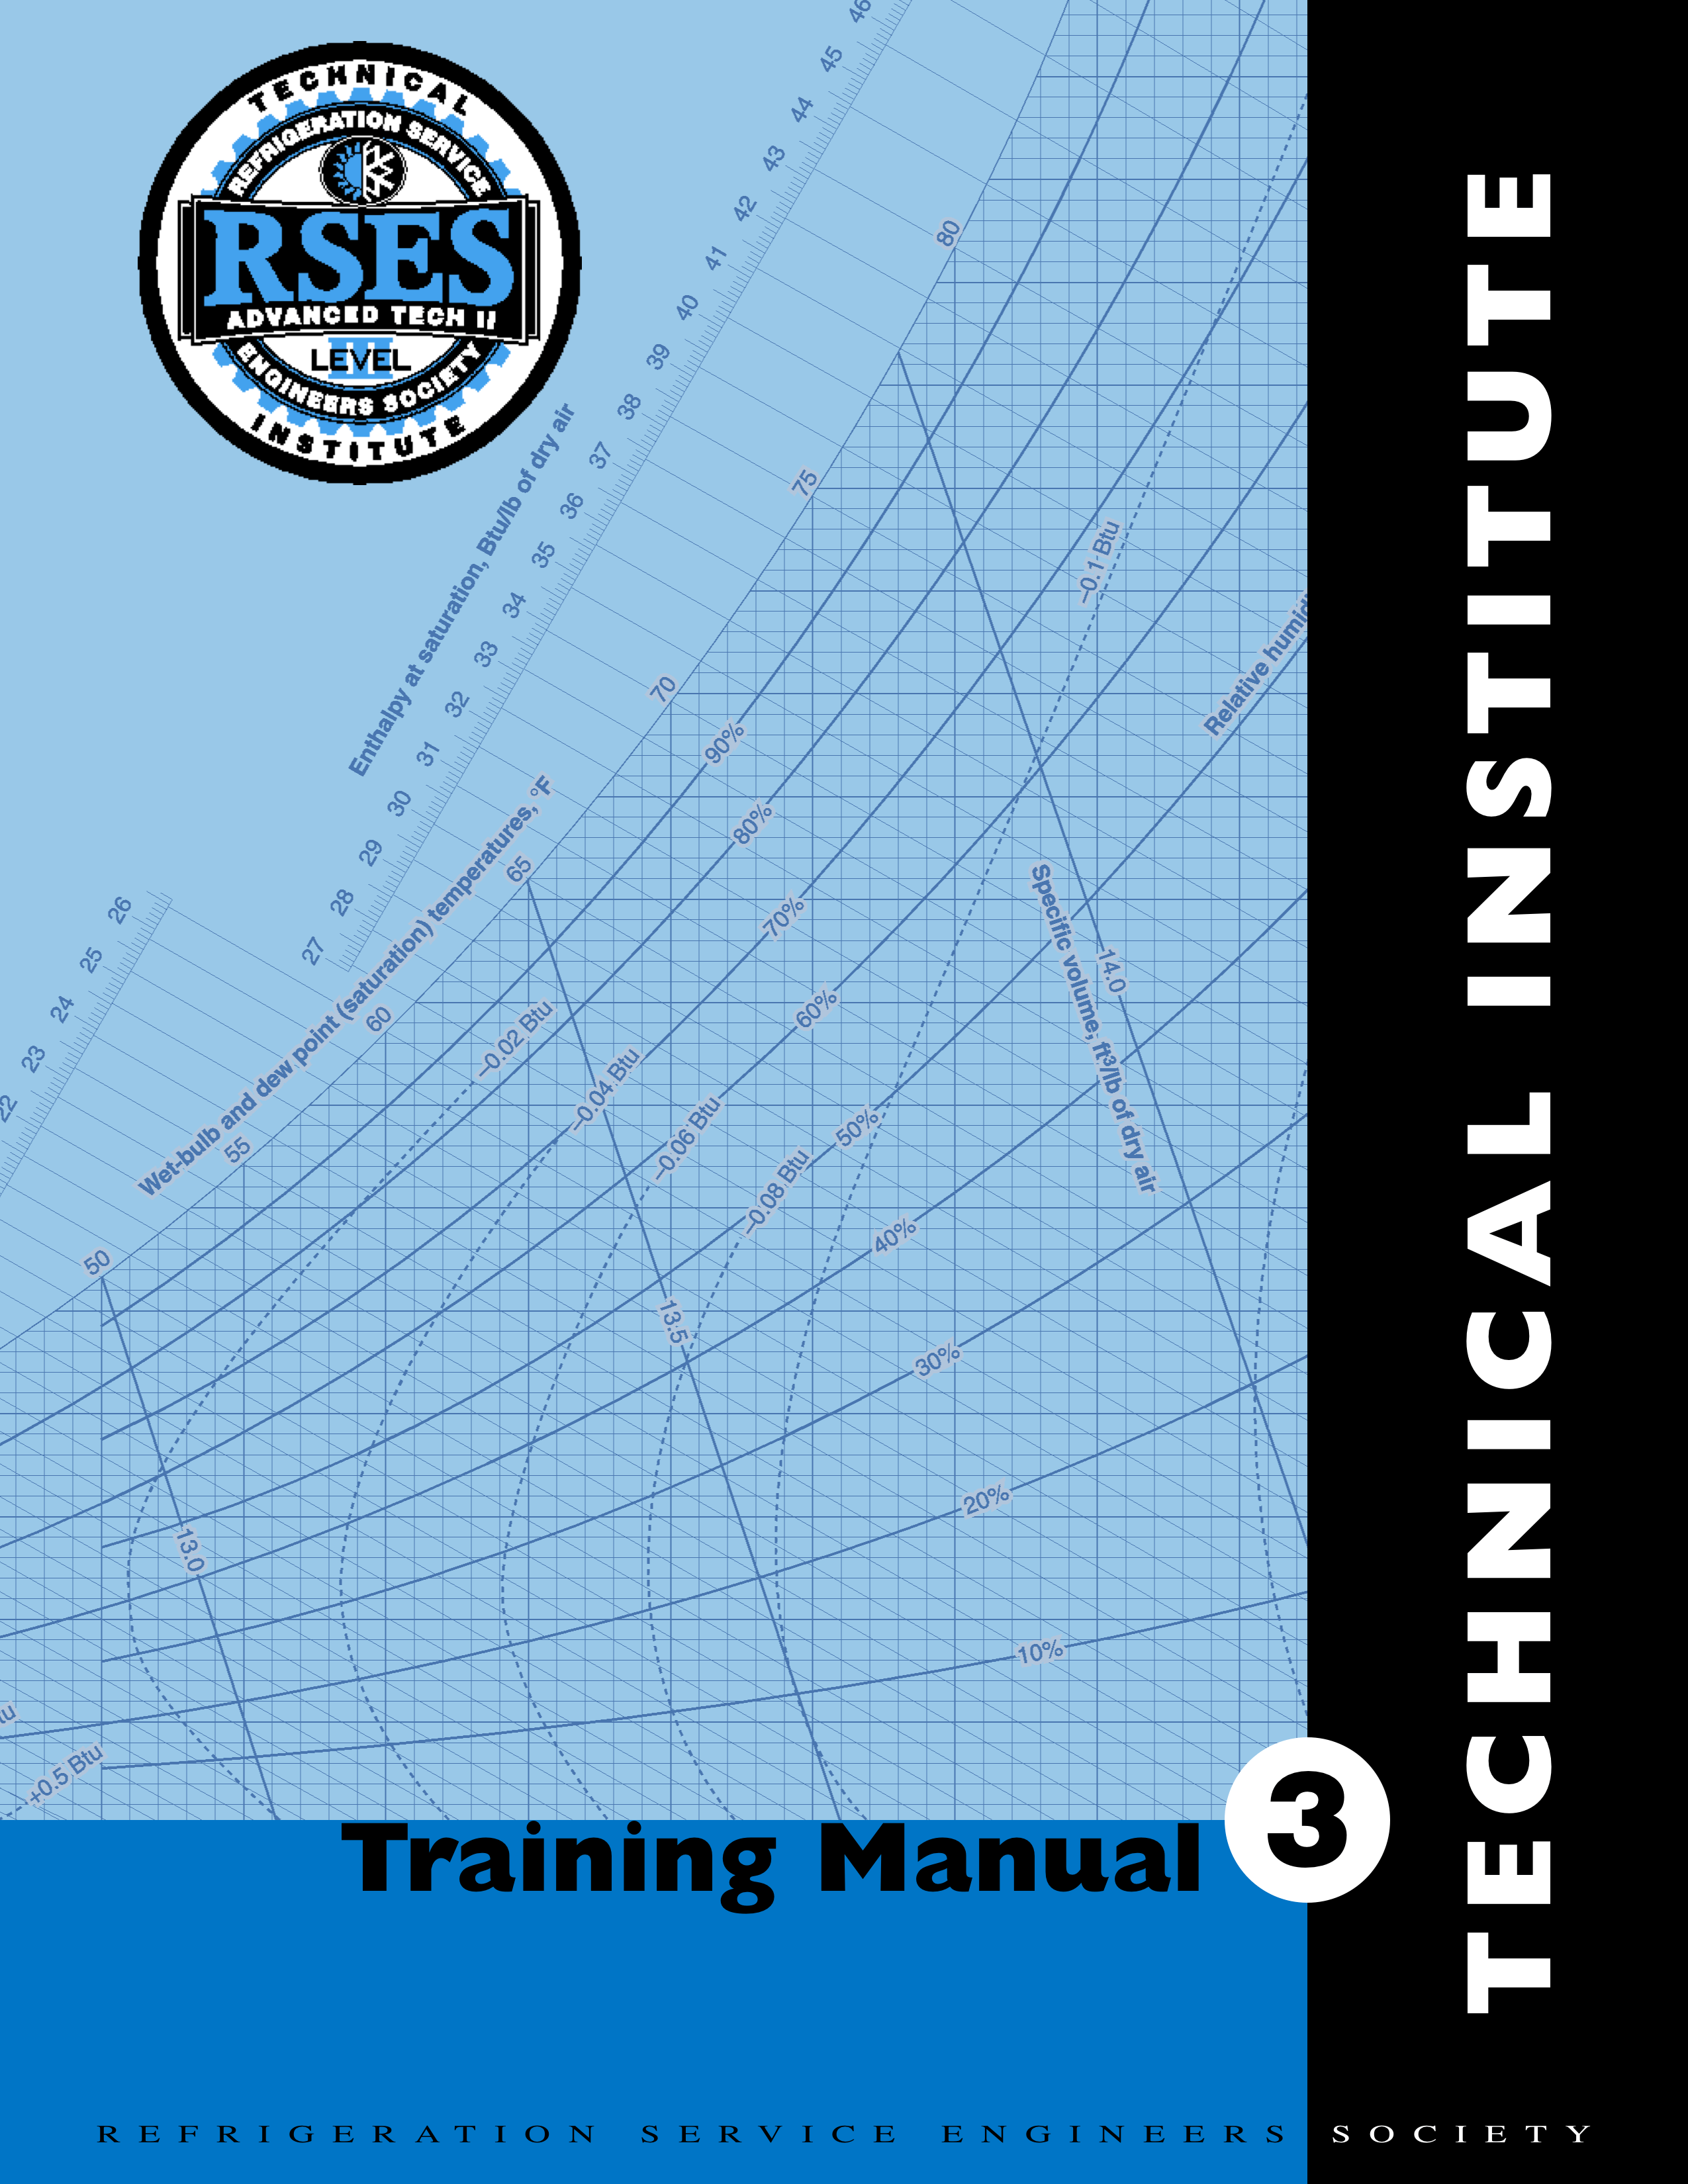 RSES Technical Institute Training Manual 3 Instructor Edition